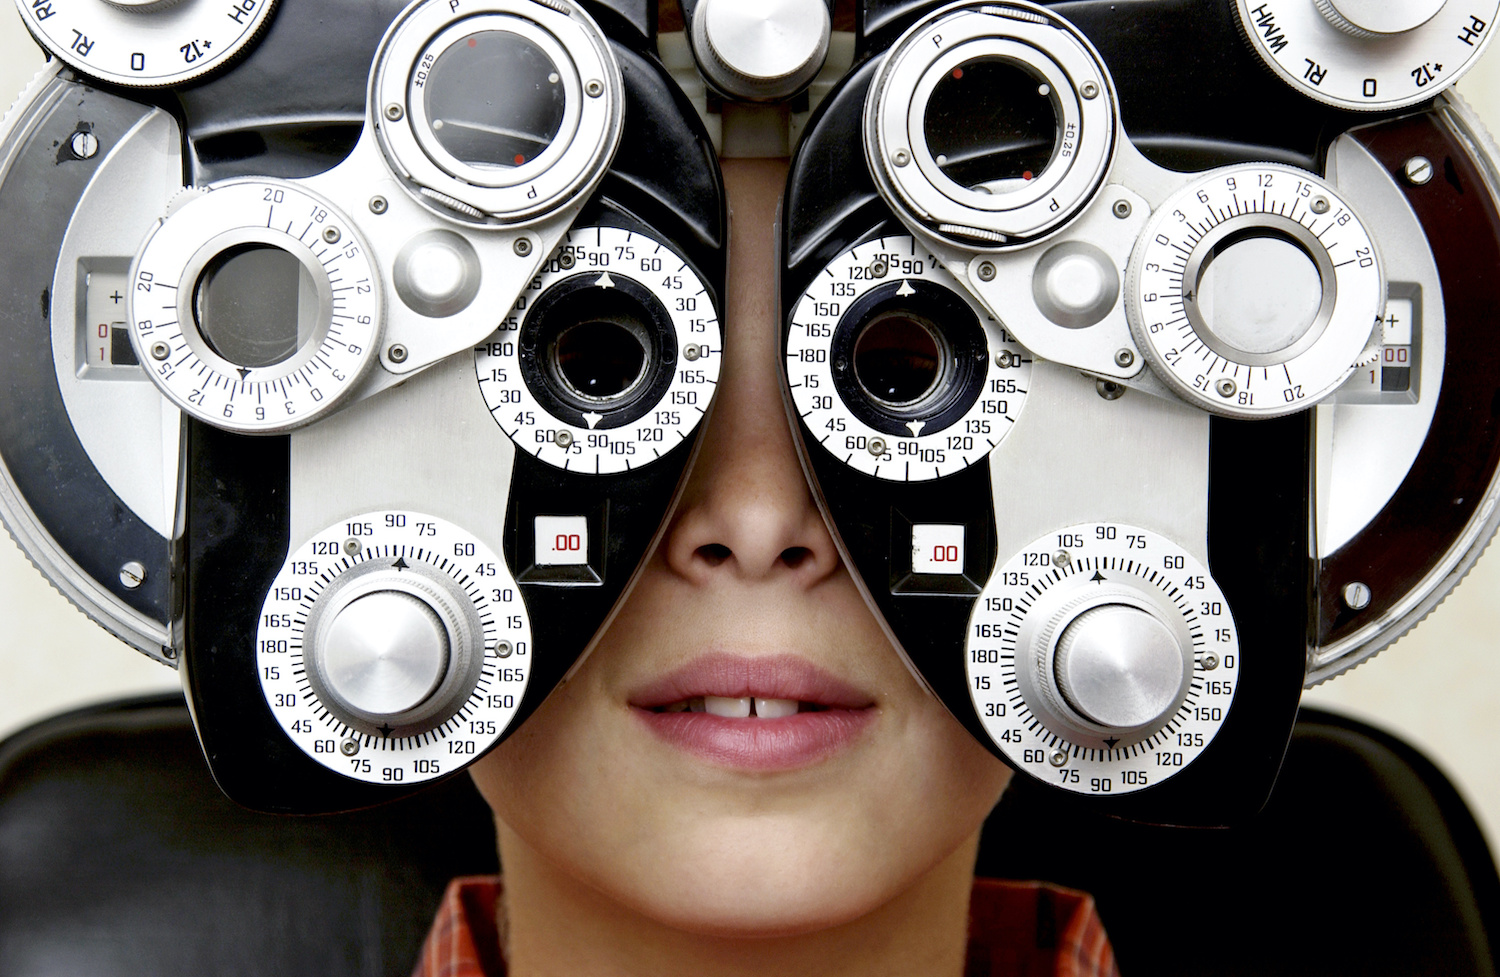 Optometrist scopeofpractice bill moves forward in the House